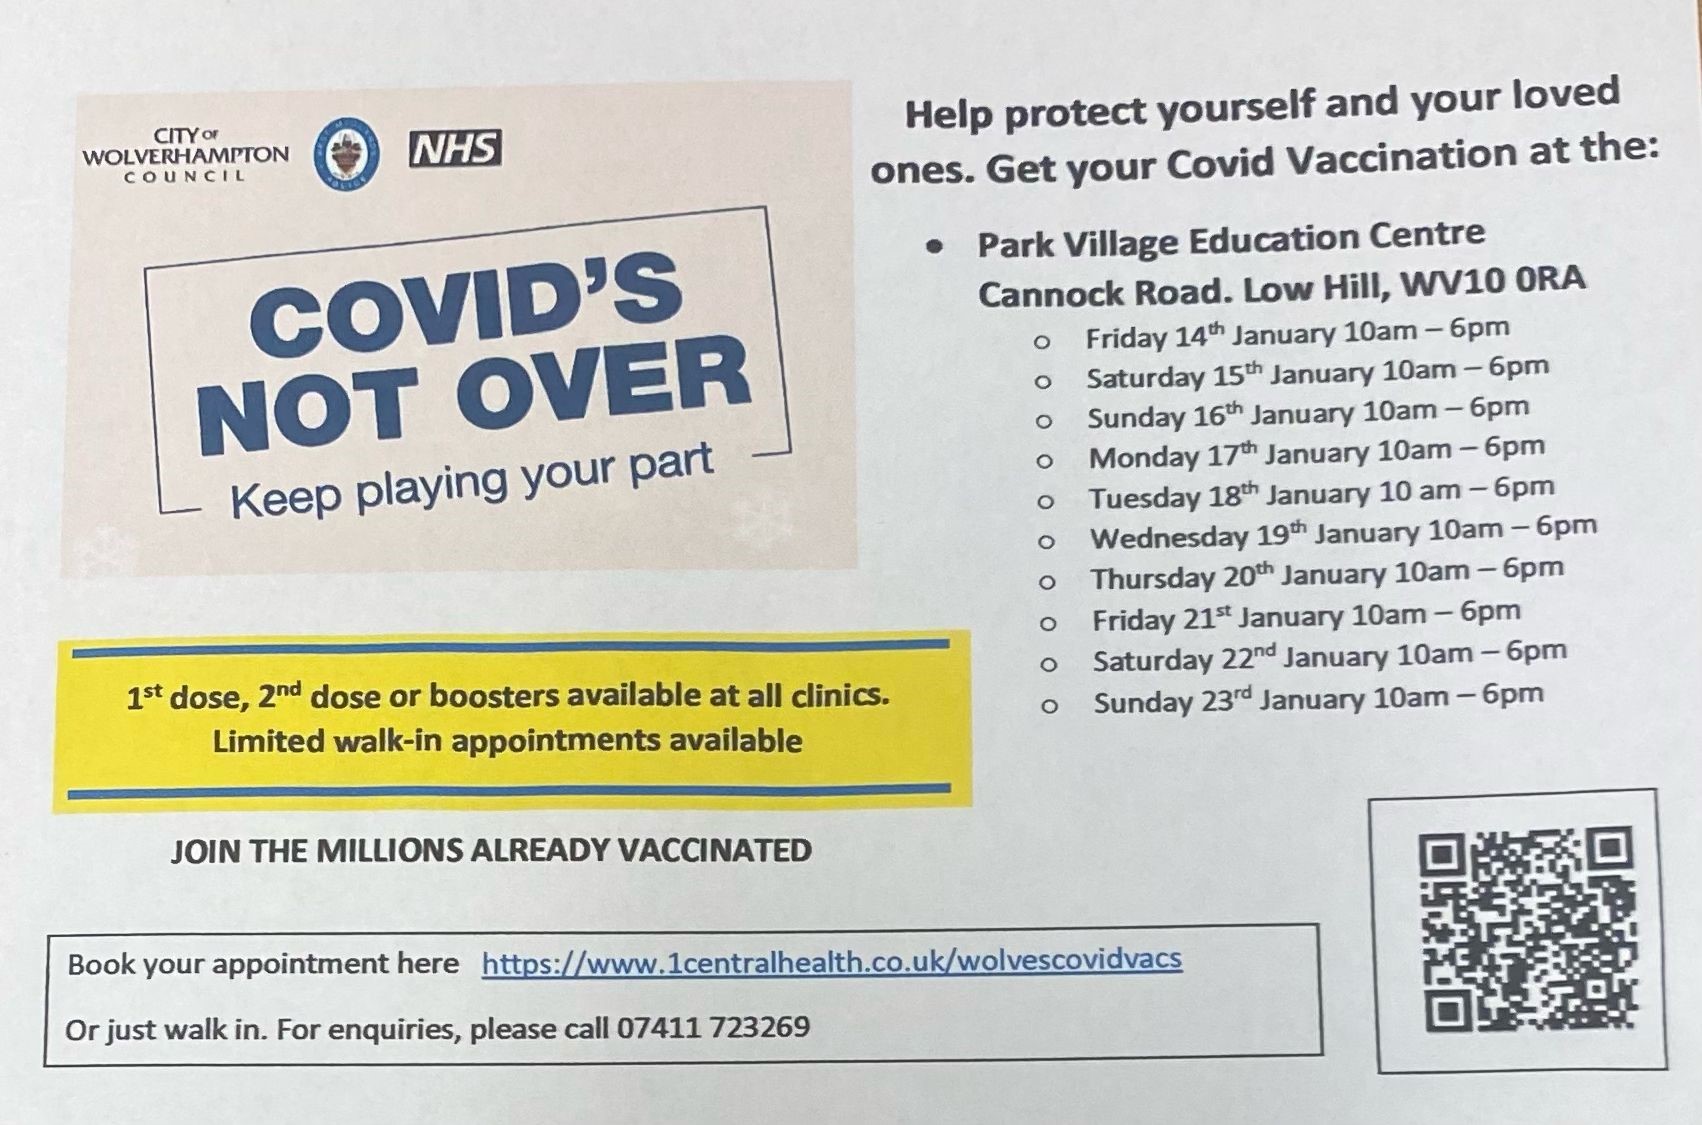 Get Your Covid Vaccination